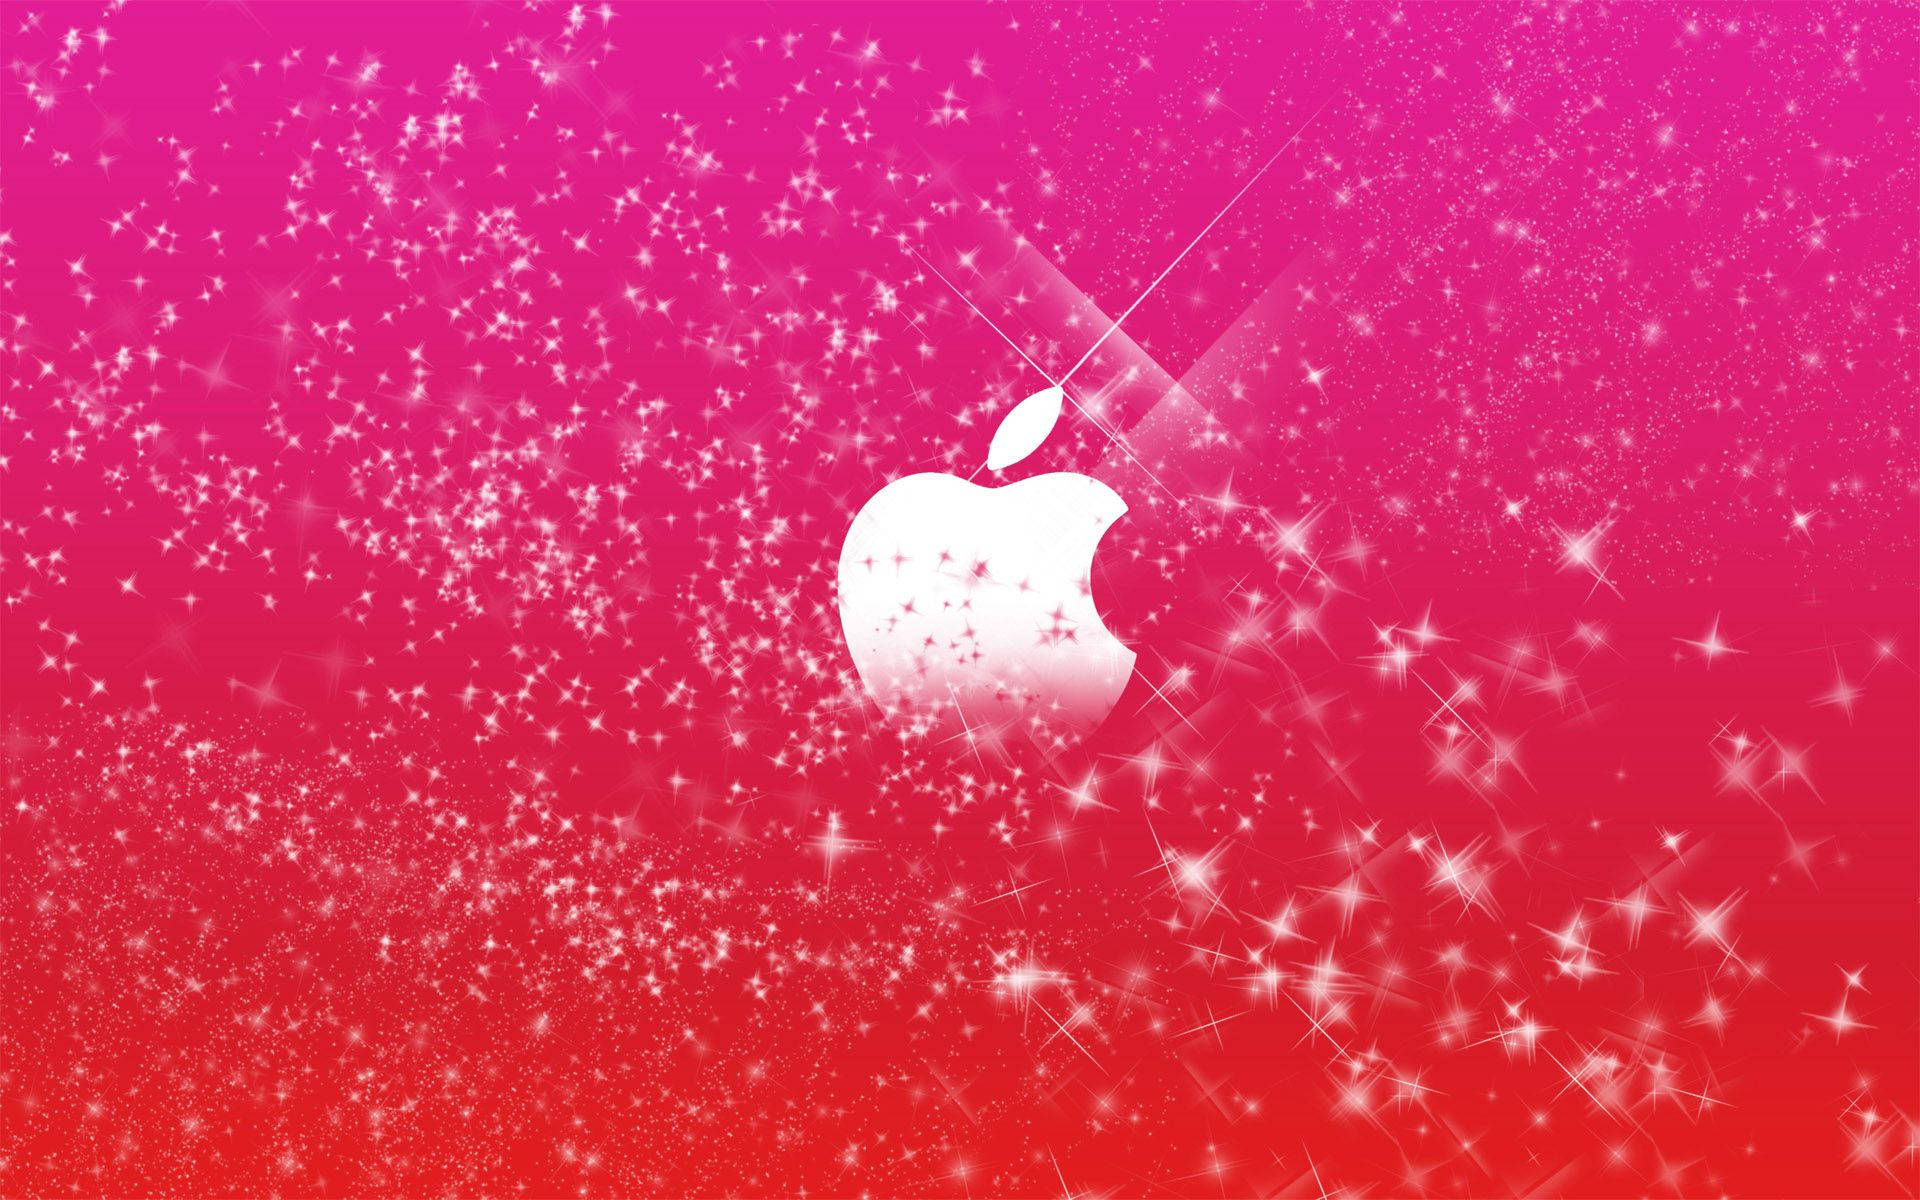 Apple Wallpapers Hd - Hd Wallpapers Background